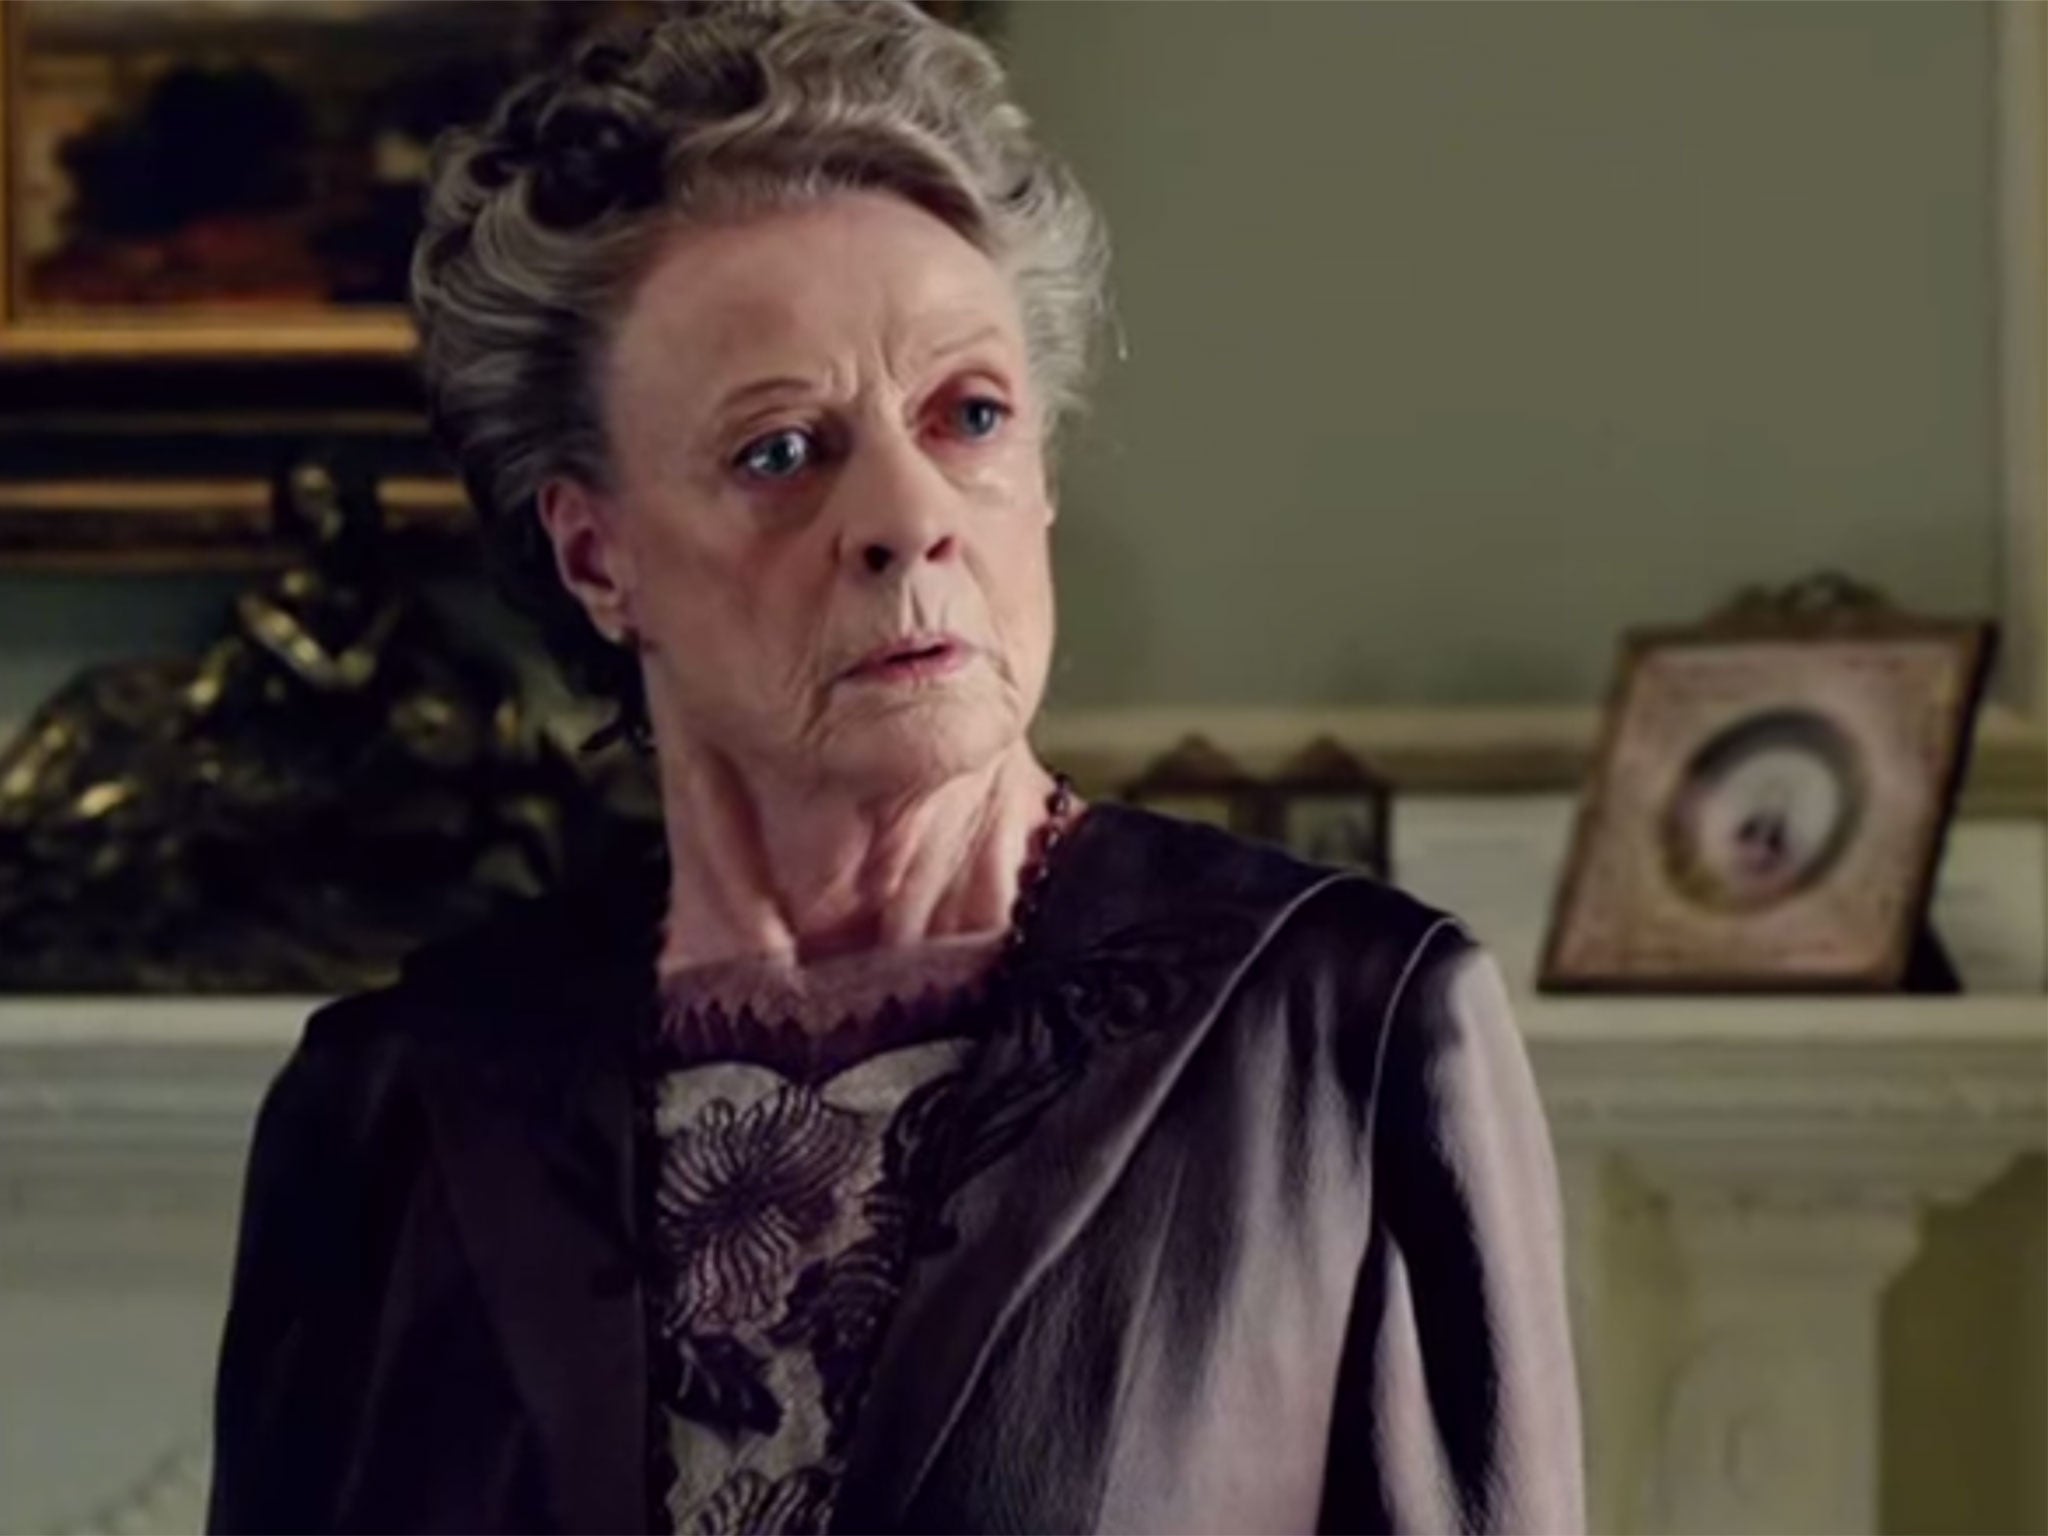 The Dowager Countess, played by Dame Maggie Smith, would be horrified by jazz hands in the drawing room